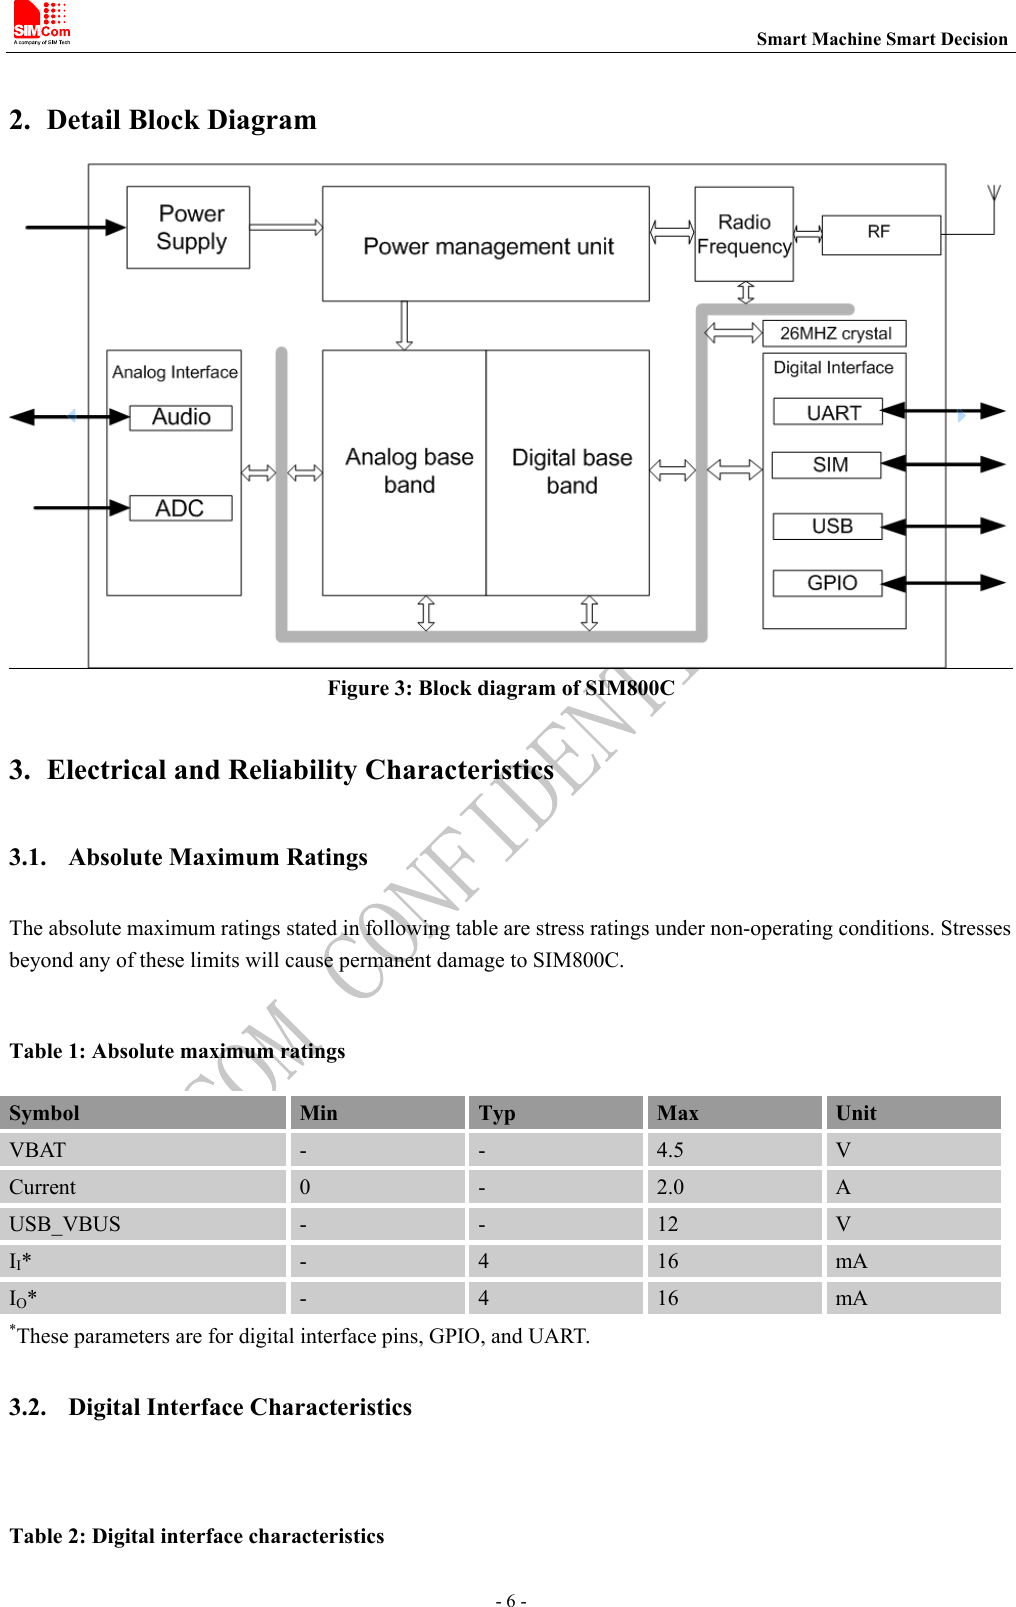                                                                          Smart Machine Smart Decision - 6 -  2. Detail Block Diagram  Figure 3: Block diagram of SIM800C  3. Electrical and Reliability Characteristics 3.1. Absolute Maximum Ratings The absolute maximum ratings stated in following table are stress ratings under non-operating conditions. Stresses beyond any of these limits will cause permanent damage to SIM800C.  Table 1: Absolute maximum ratings Symbol  Min  Typ  Max  Unit VBAT  -  -  4.5  V Current    0  -  2.0  A USB_VBUS  -  -  12  V II*  -  4  16  mA IO*  -  4  16  mA *These parameters are for digital interface pins, GPIO, and UART. 3.2. Digital Interface Characteristics  Table 2: Digital interface characteristics 